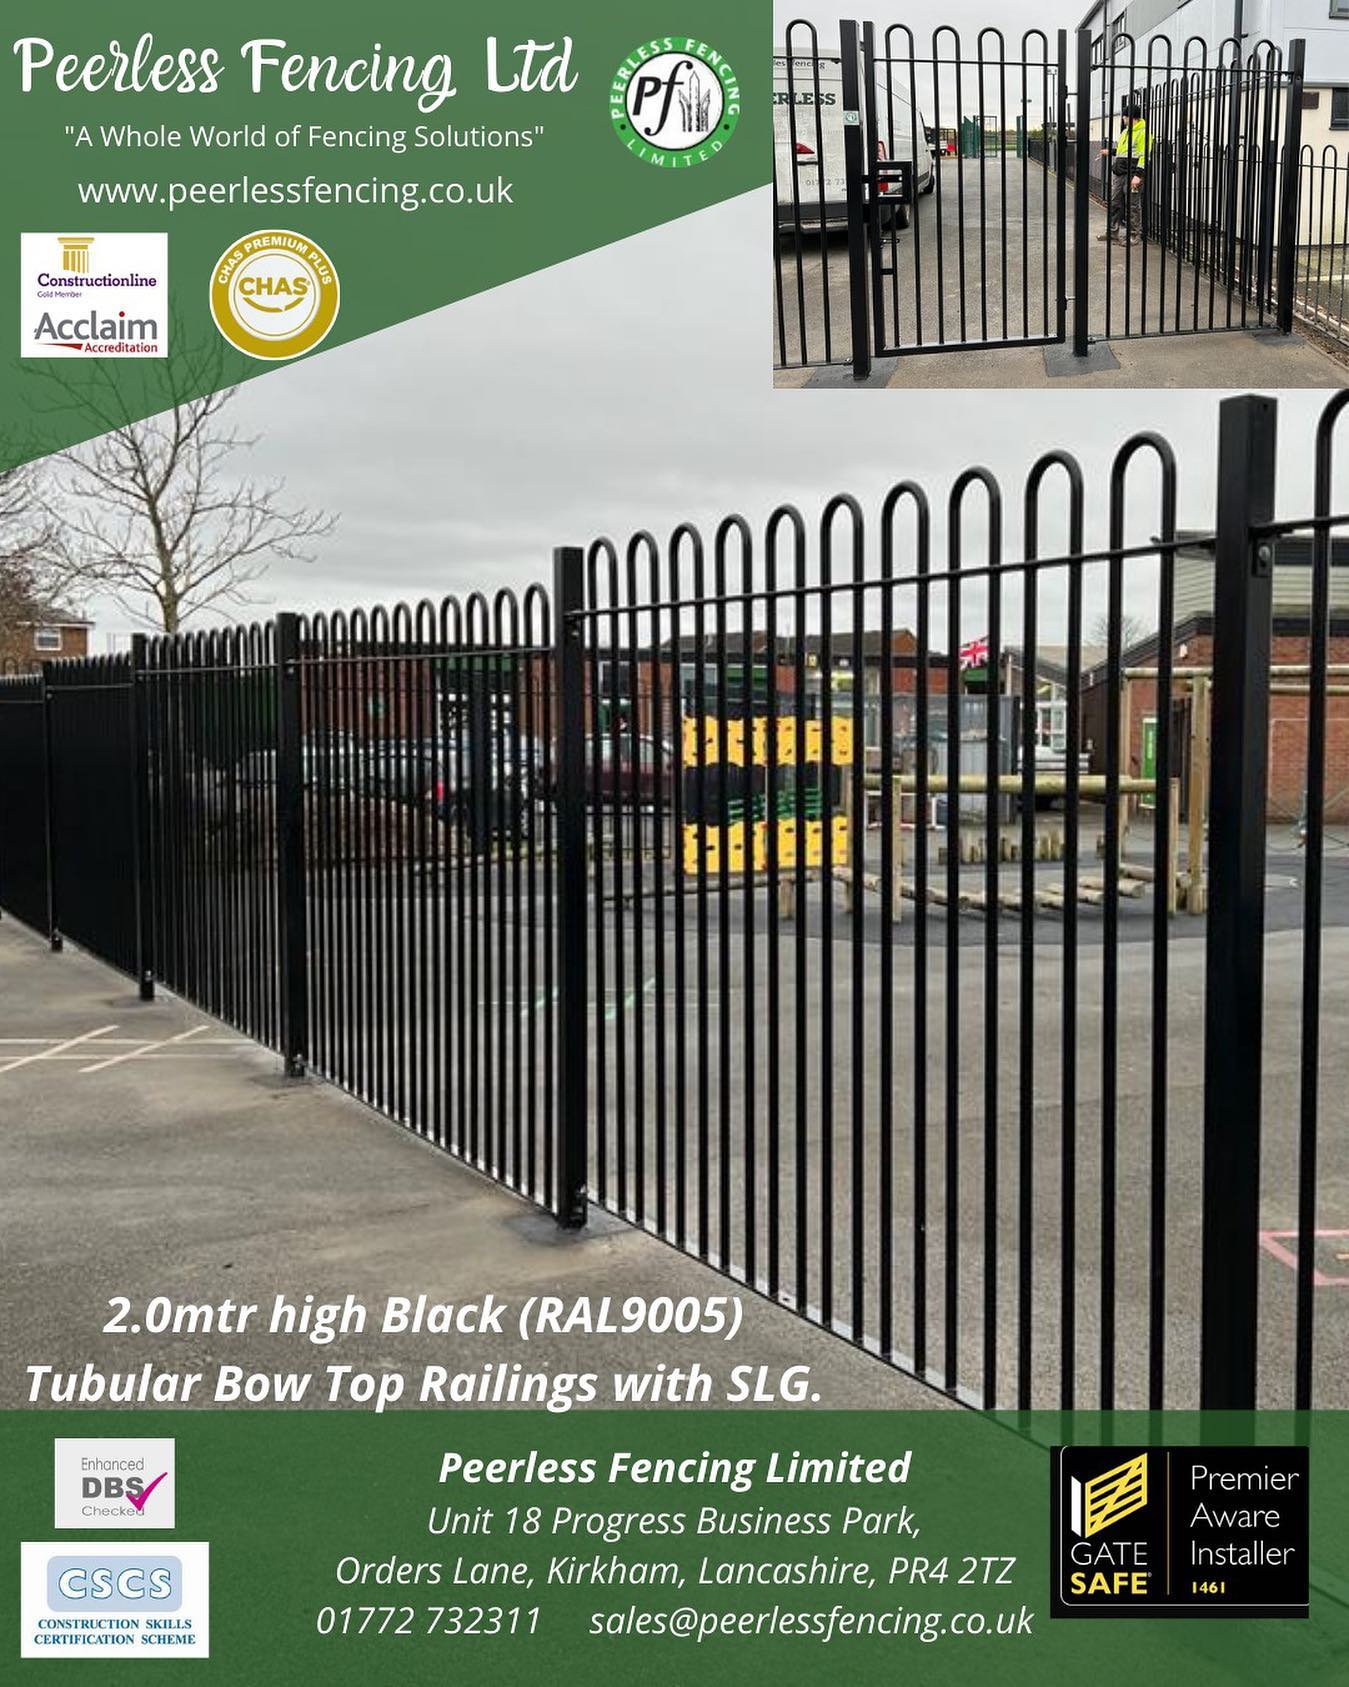 2.0mtr high Tubular Bow Top Railings look fantastic in educational and recreational establishments. Contact sales@peerlessfencing.co.uk for more information or call 01772 732311. #bowtopfencing #schoolfencing #recreationalfencing #safeguardingchildren #fencingcontractors #fencingnorthwest